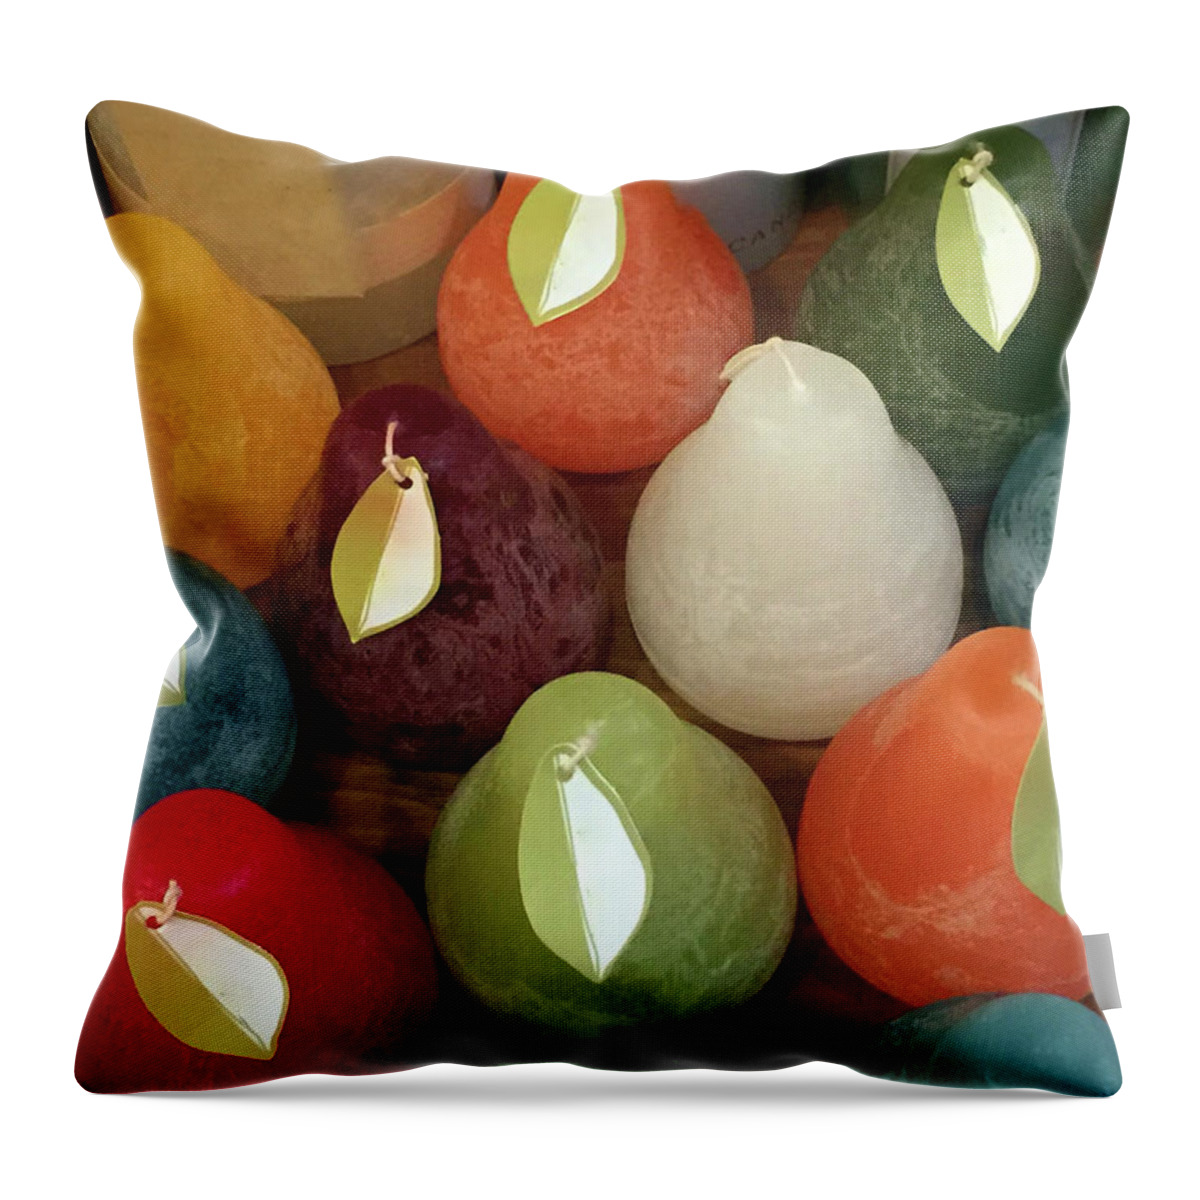 Still Life Throw Pillow featuring the photograph Polychromatic Pears by Rick Locke - Out of the Corner of My Eye